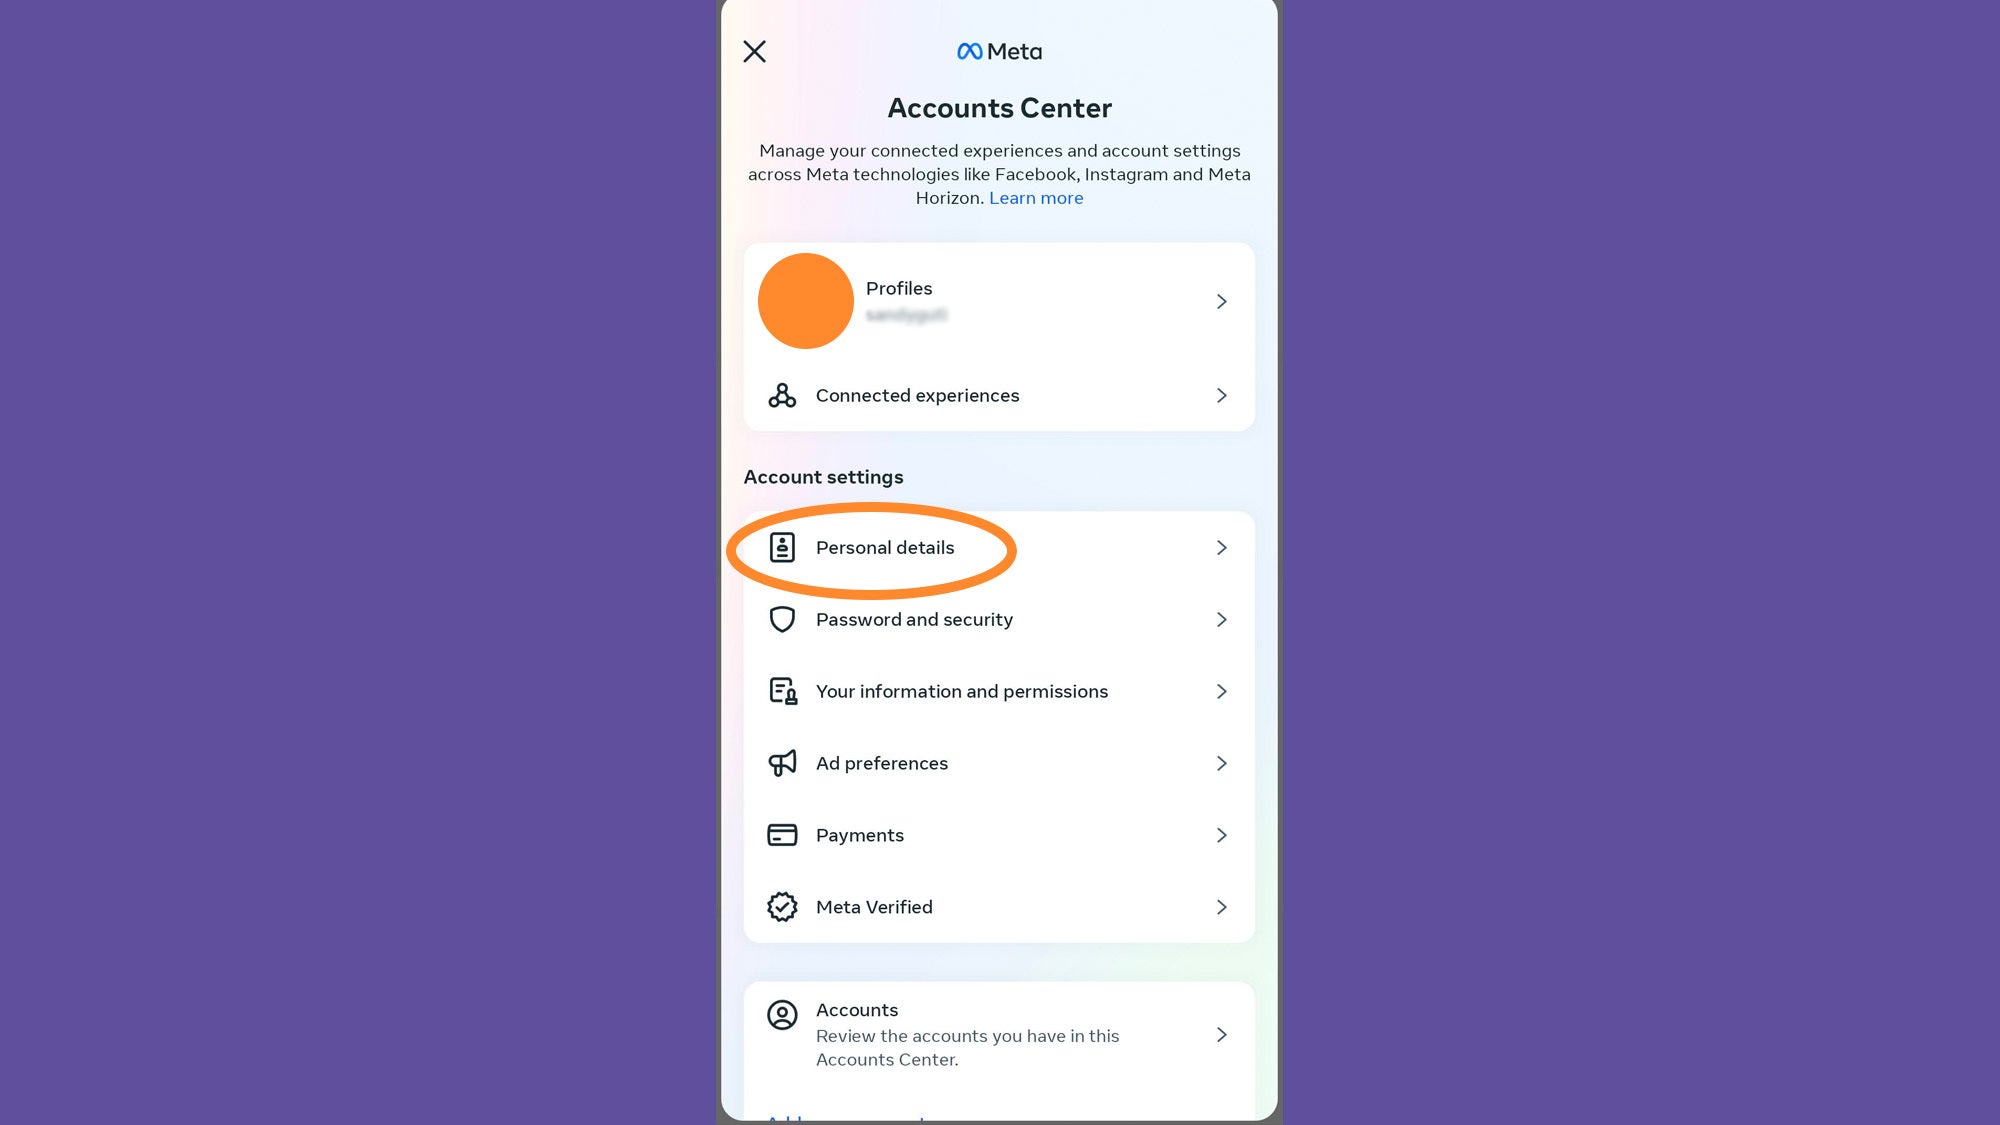 The Instagram app showing where to find your personal details, to start the process of deactivating or deleting your Instagram account.